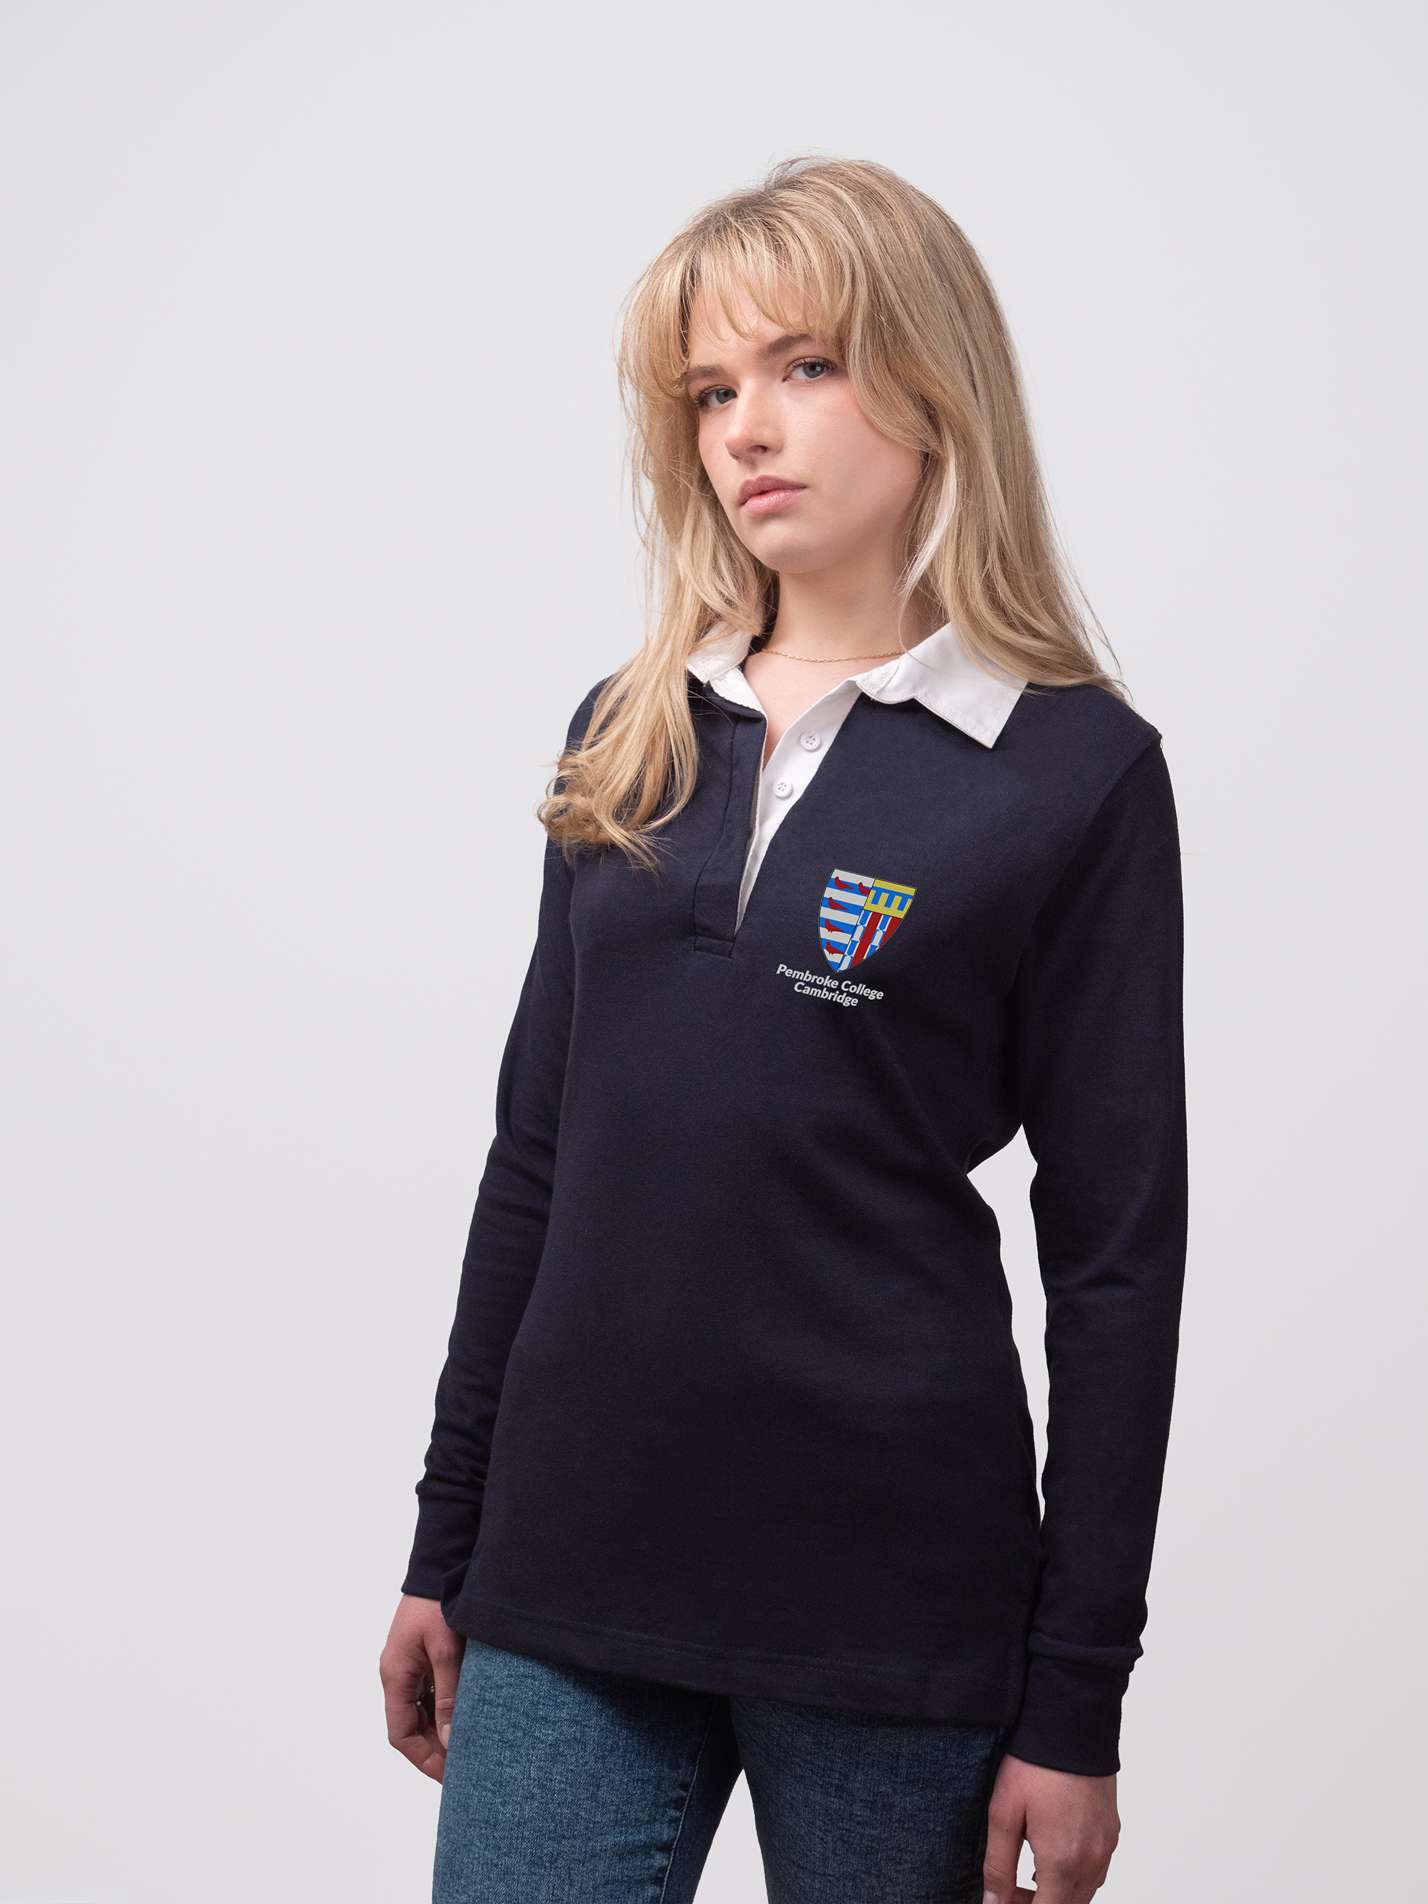 Student wearing a navy Pembroke College rugby shirt with embroidered crest